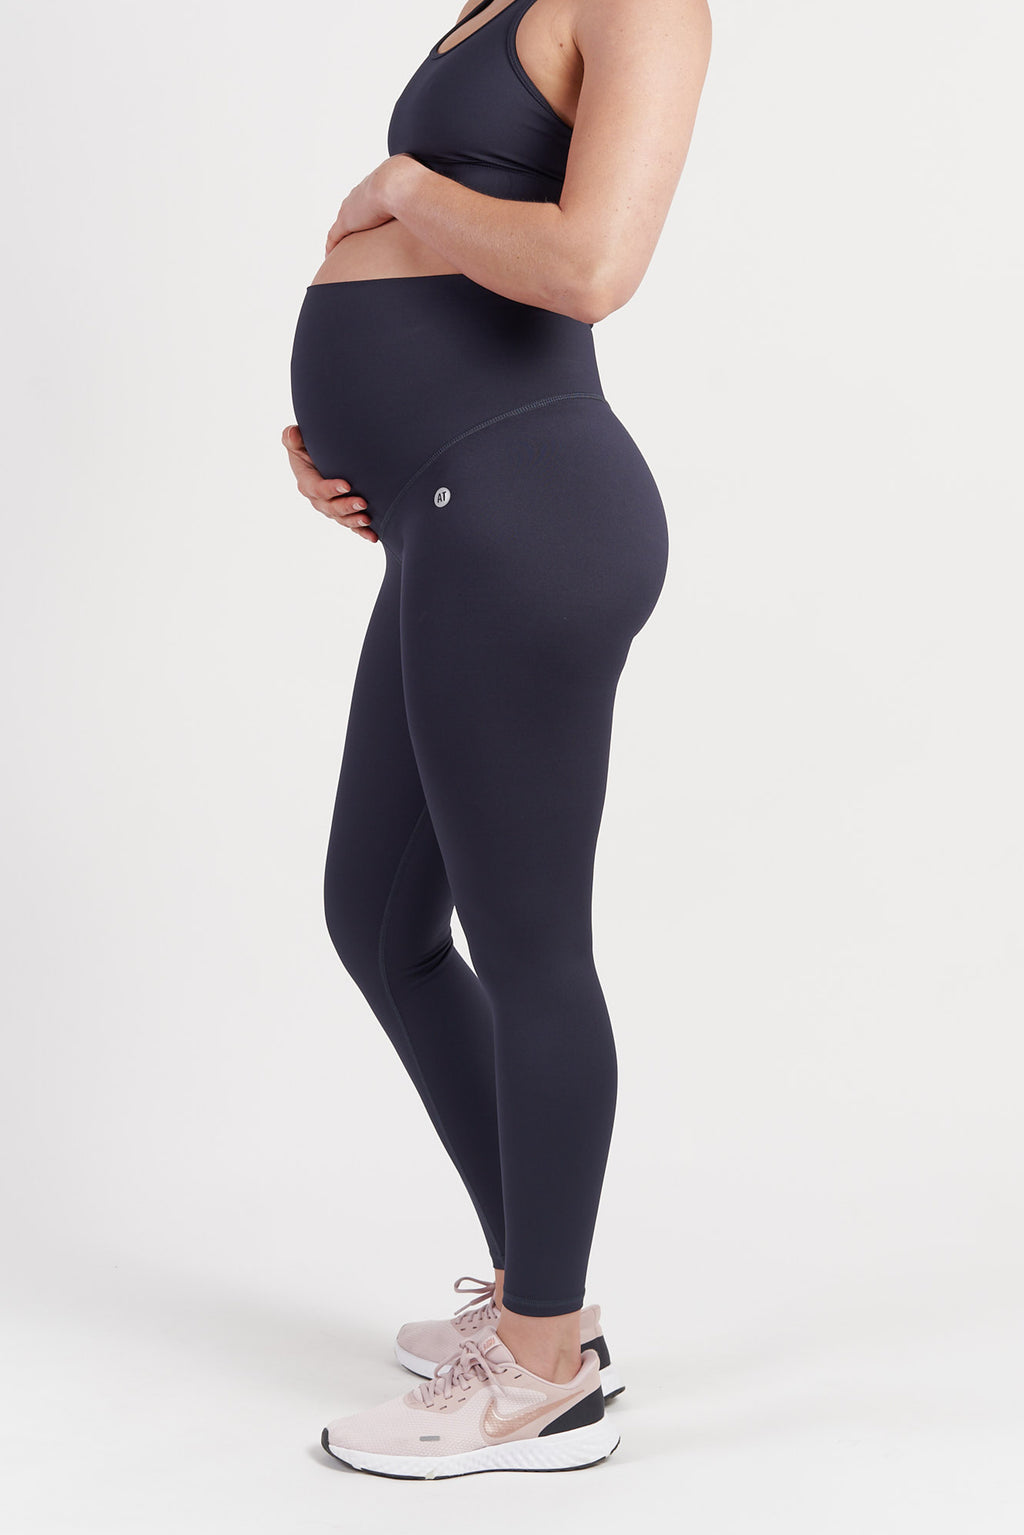 midnight-maternity-tights-side-small
